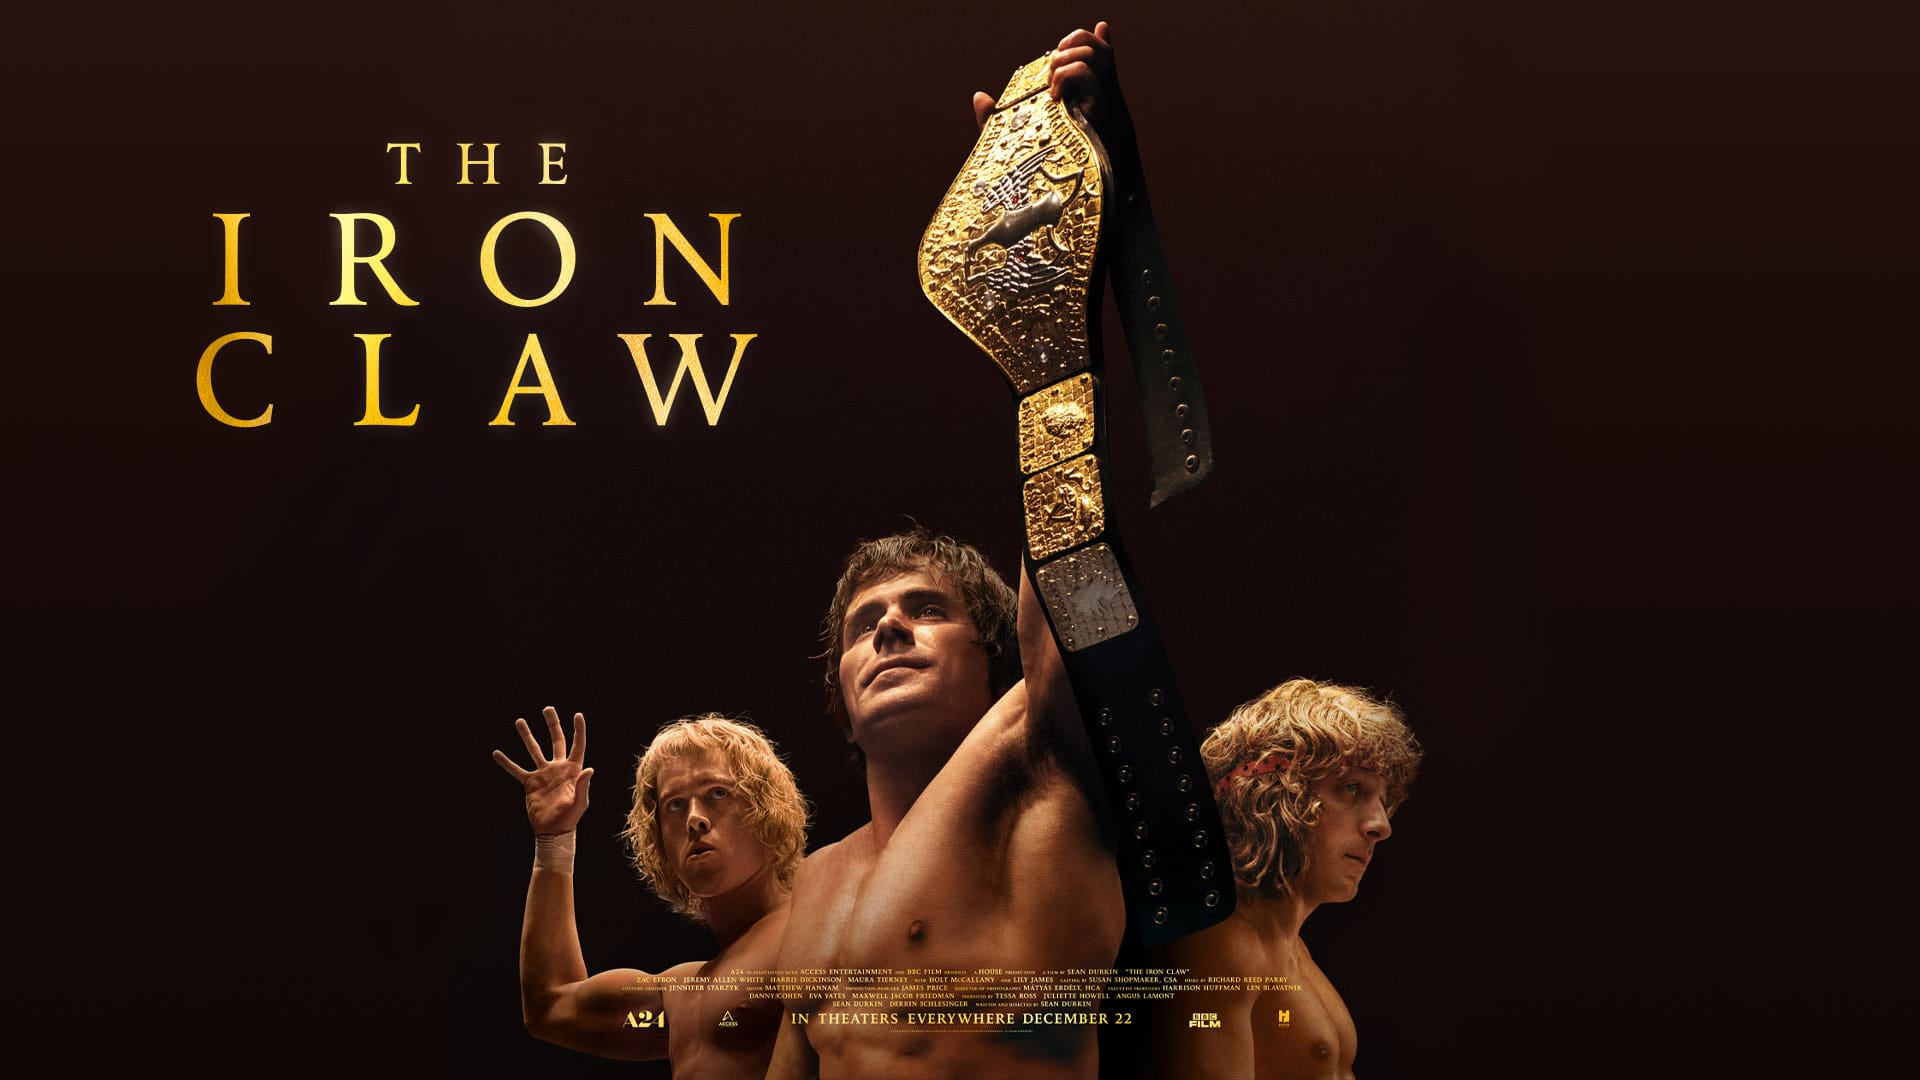 The Iron Claw prop and costume auction event graphic from the A24 film featuring Zac Efron, Lily James, and cast in wrestling attire.